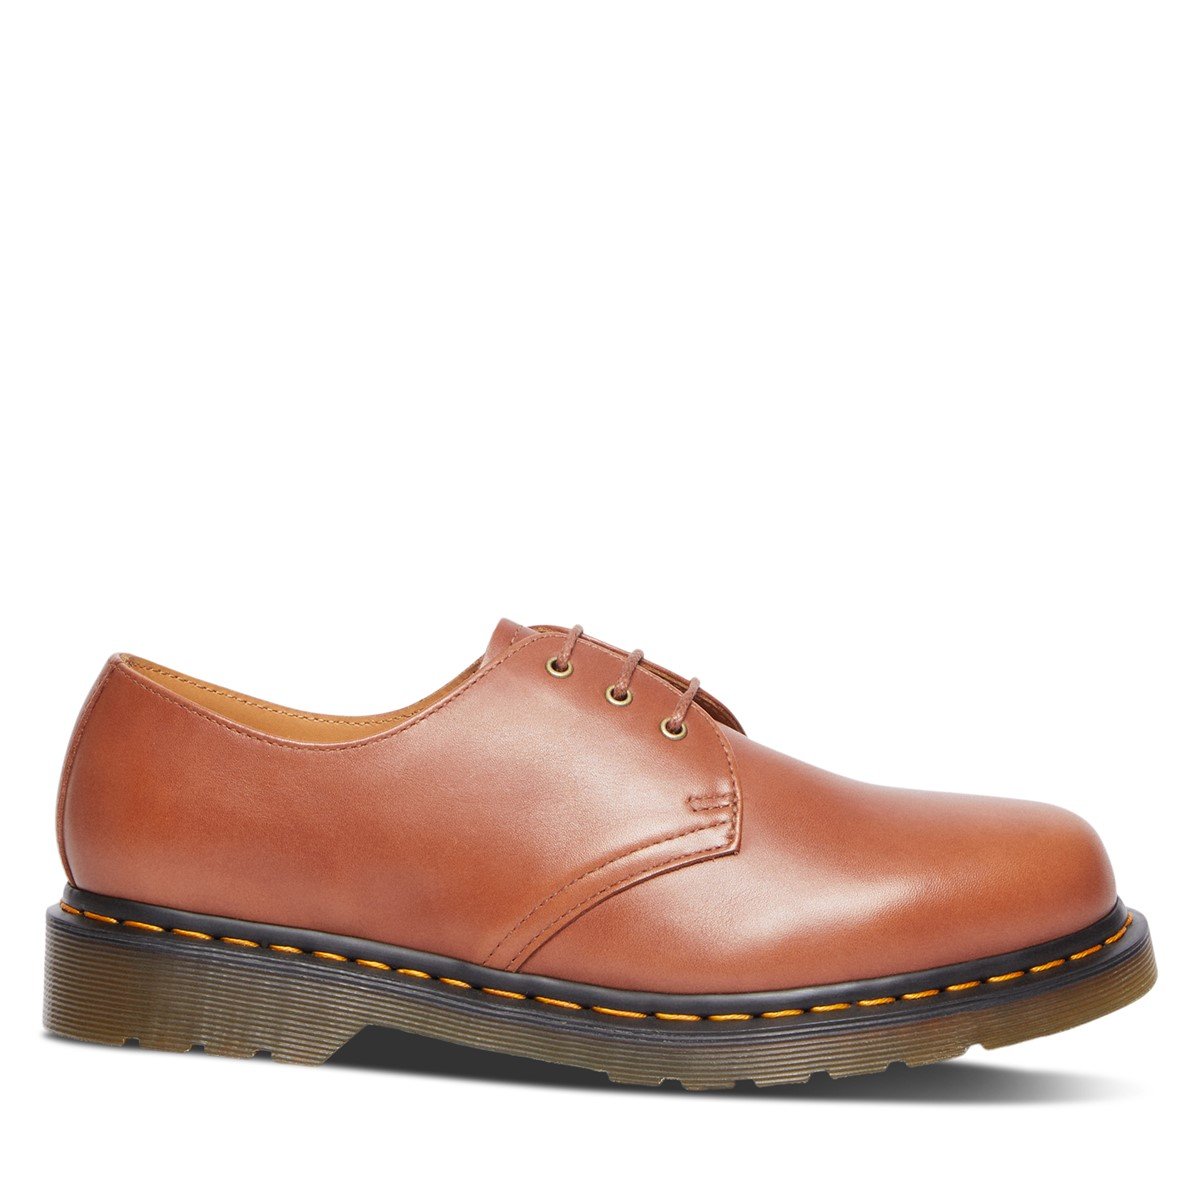 Men's 1461 Oxford Shoes in Saddle Brown